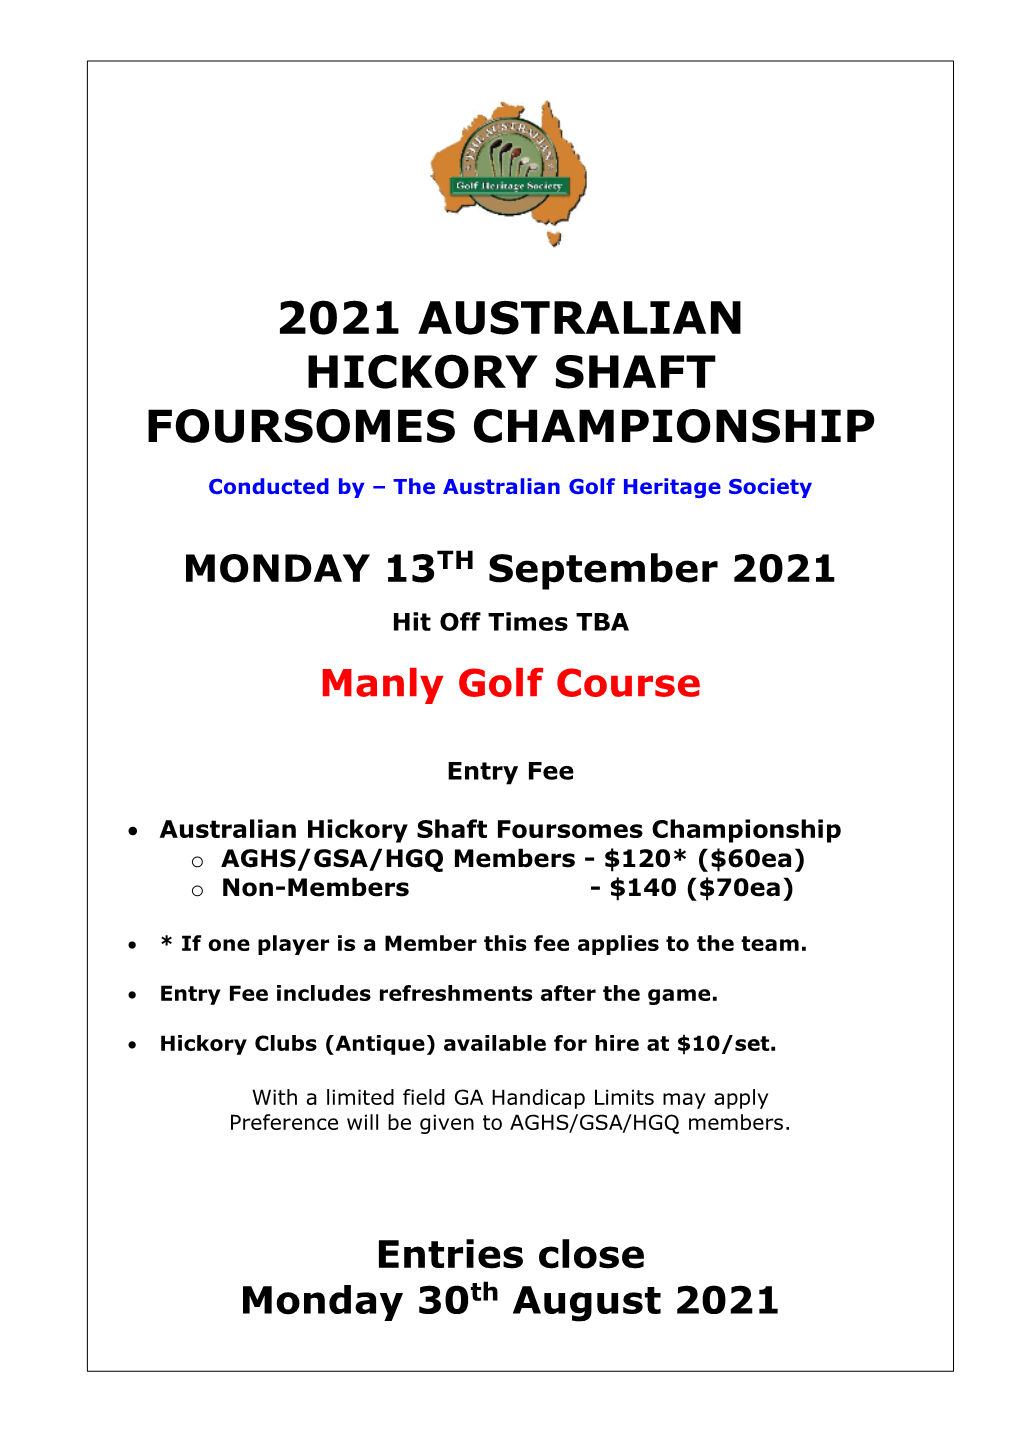 2021 Australian Hickory Shaft Foursomes Championships Please Print Clearly in Black Or Blue Pen